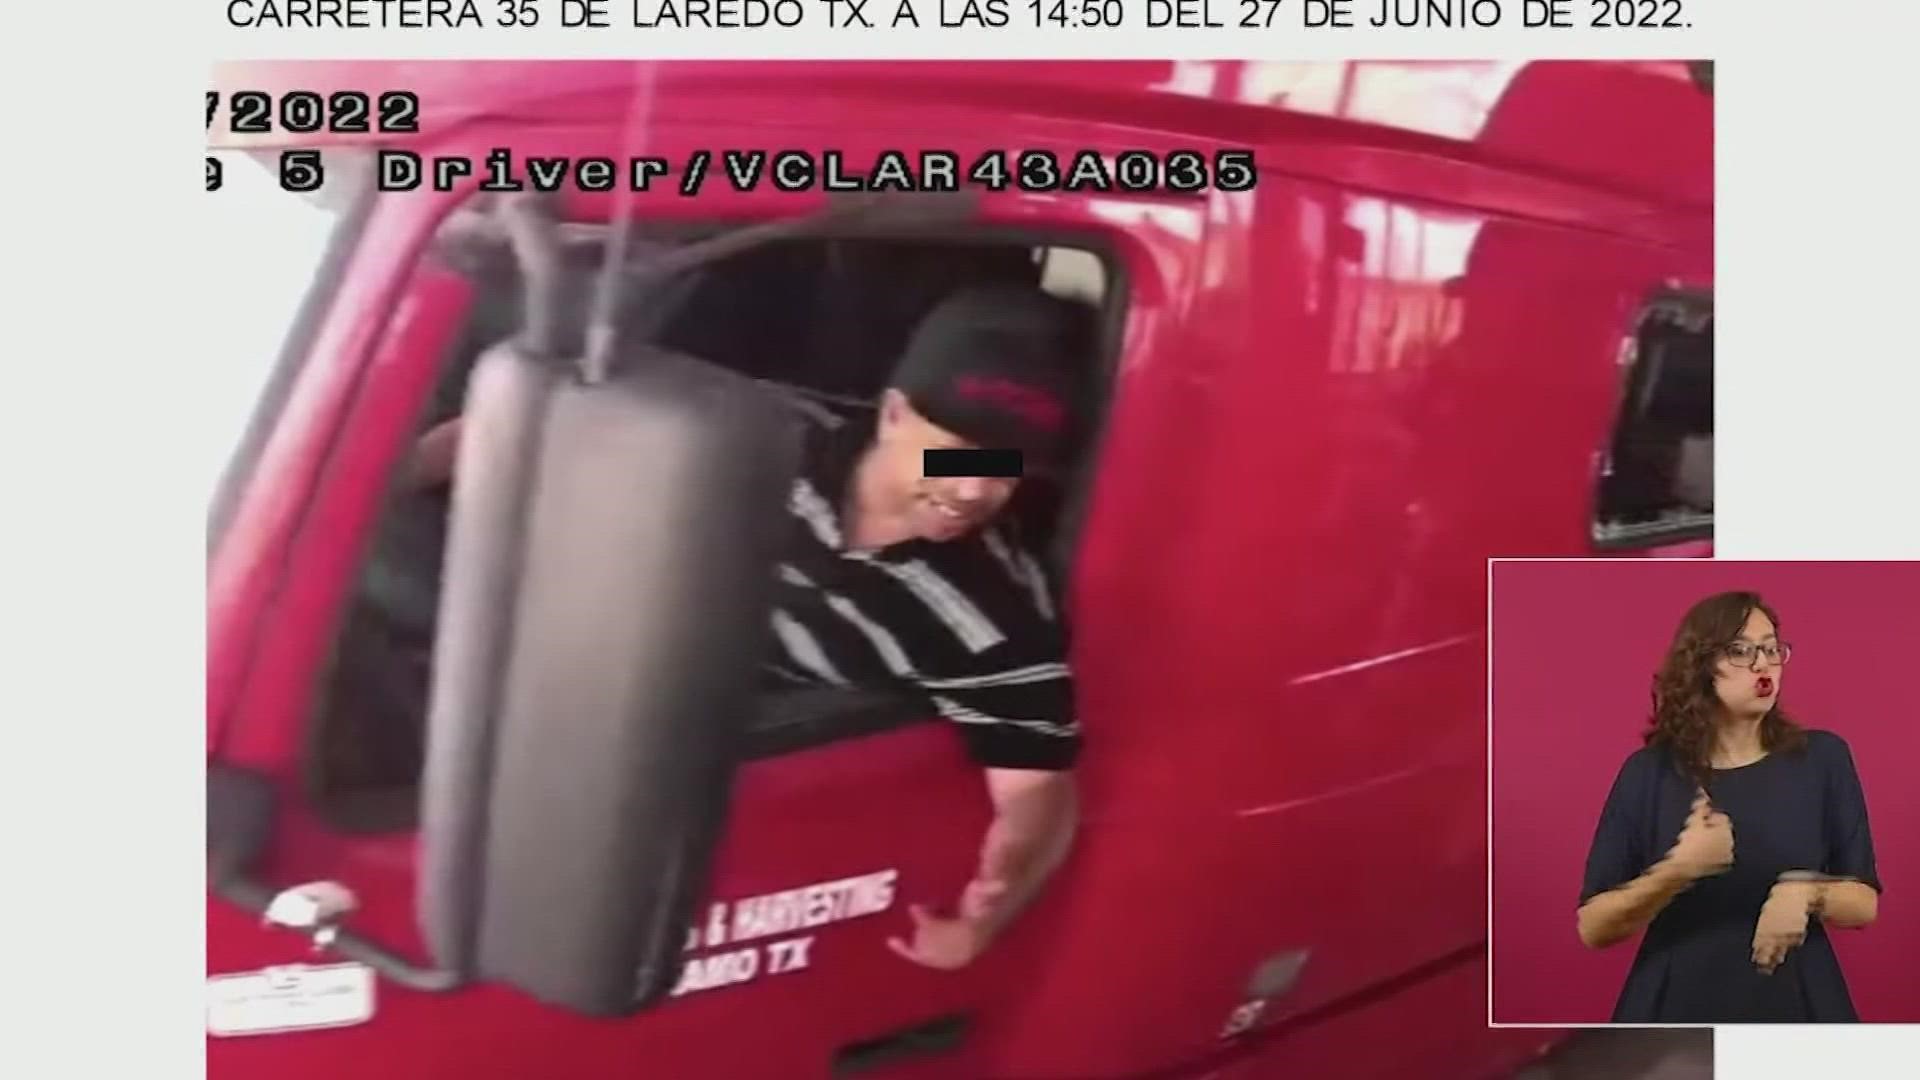 Investigators say 45-year-old Homero Zamorano, from Pasadena, pretended to be one of the injured migrants but video shows him driving the truck.